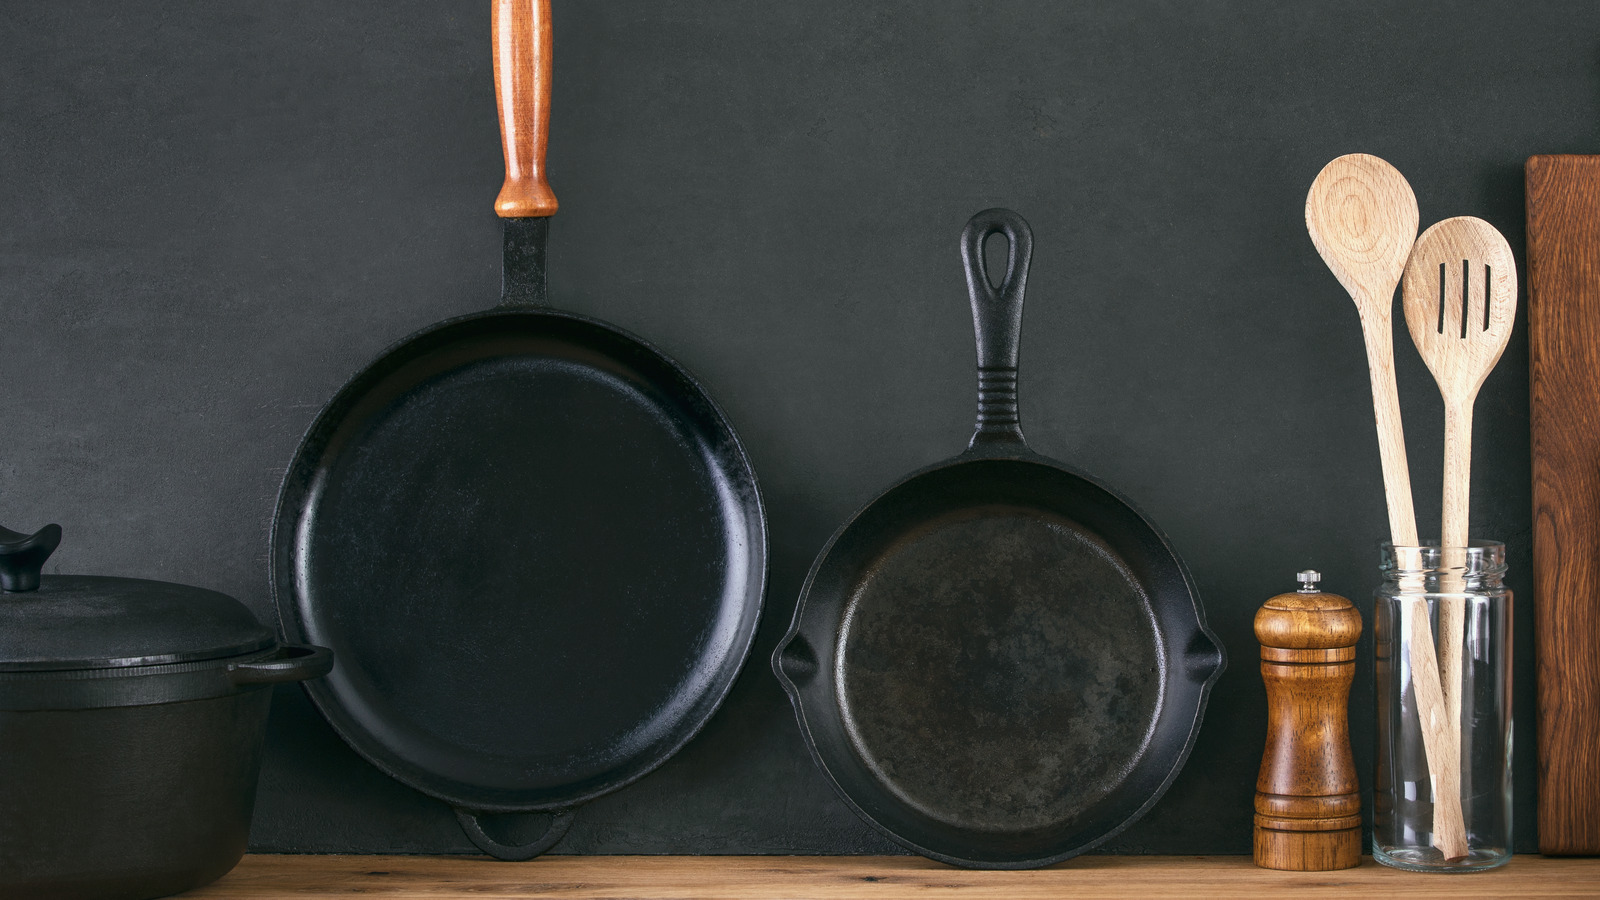 The Best Oils To Use With Your Cast Iron Pan